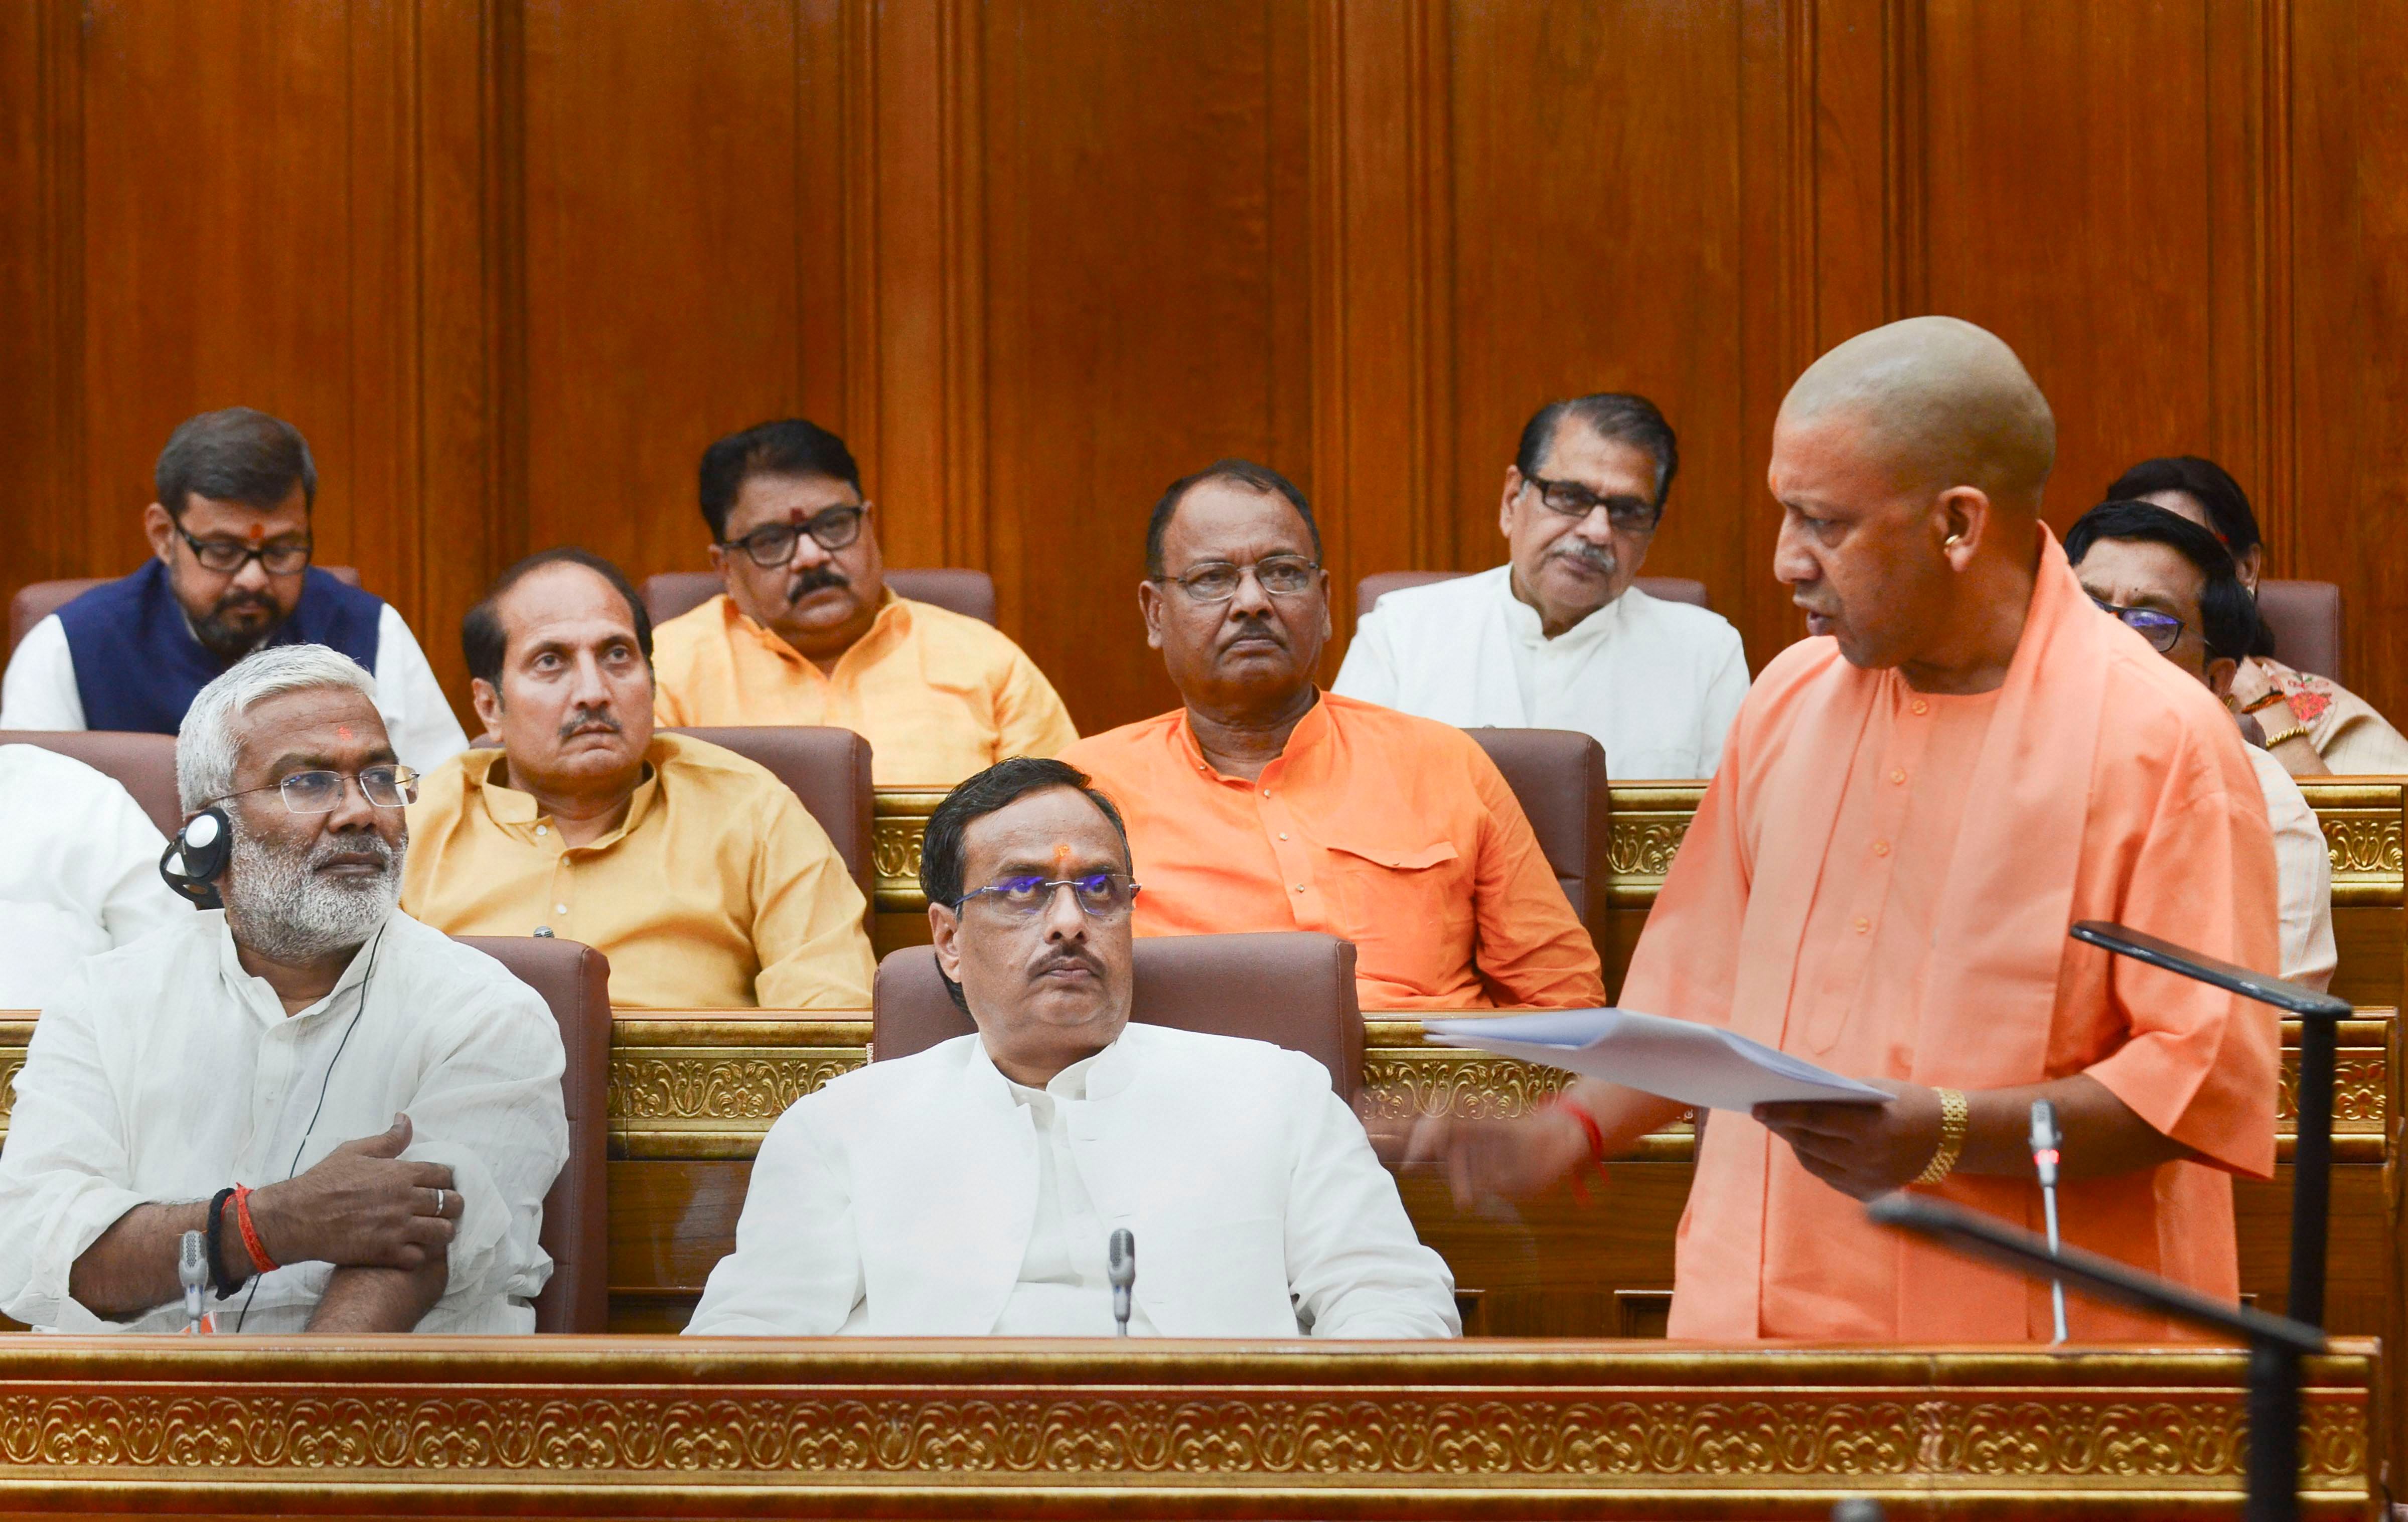 Uttar Pradesh Chief Minister Yogi Adityanath addresses during the 36-hour special session in the UP Assembly to mark the 150th anniversary of Mahatma Gandhi, in Lucknow